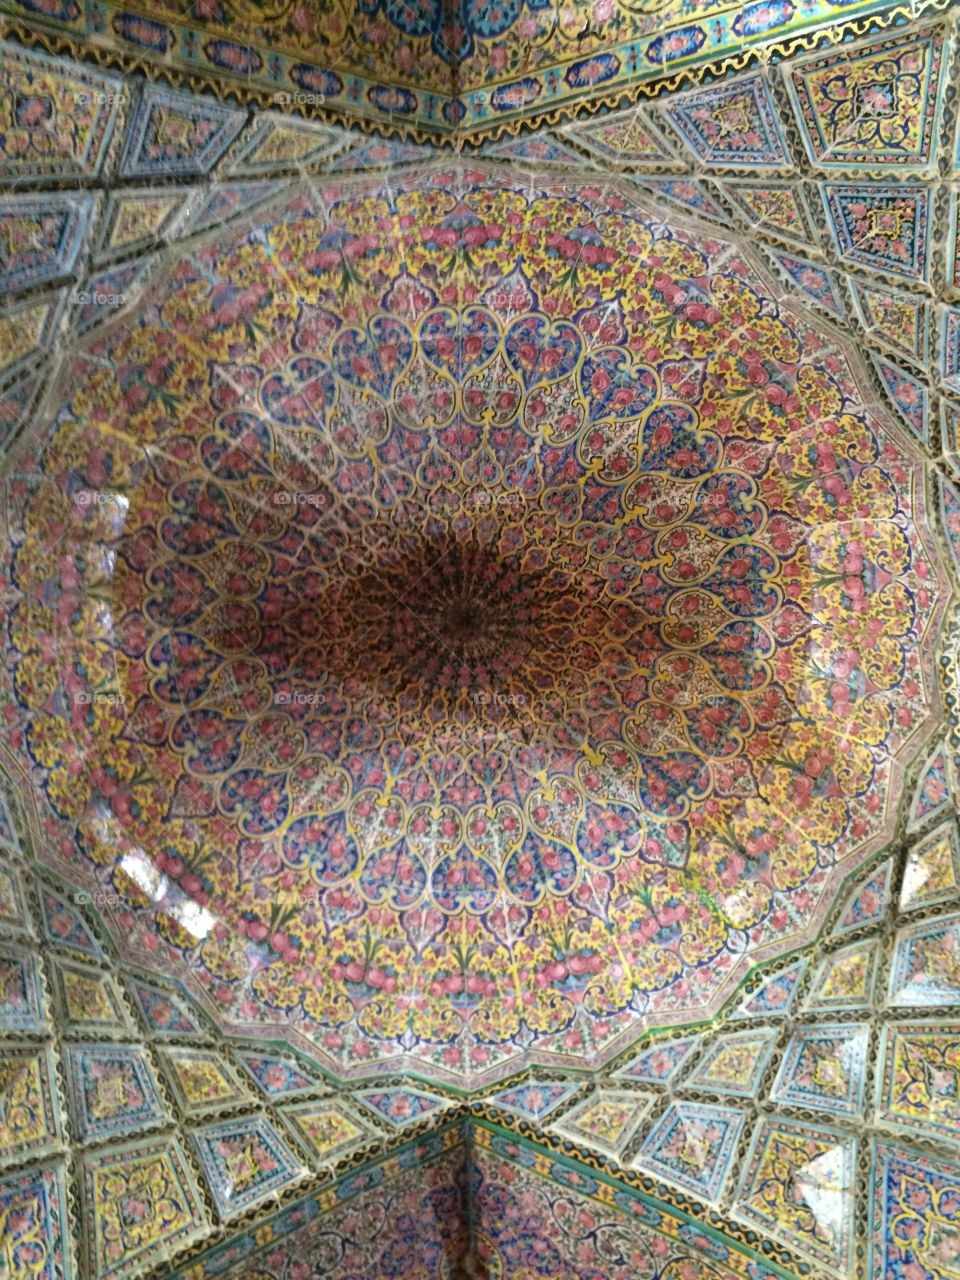 Looking up. Taken by iphone 5s in an old mosque in shiraz of iran